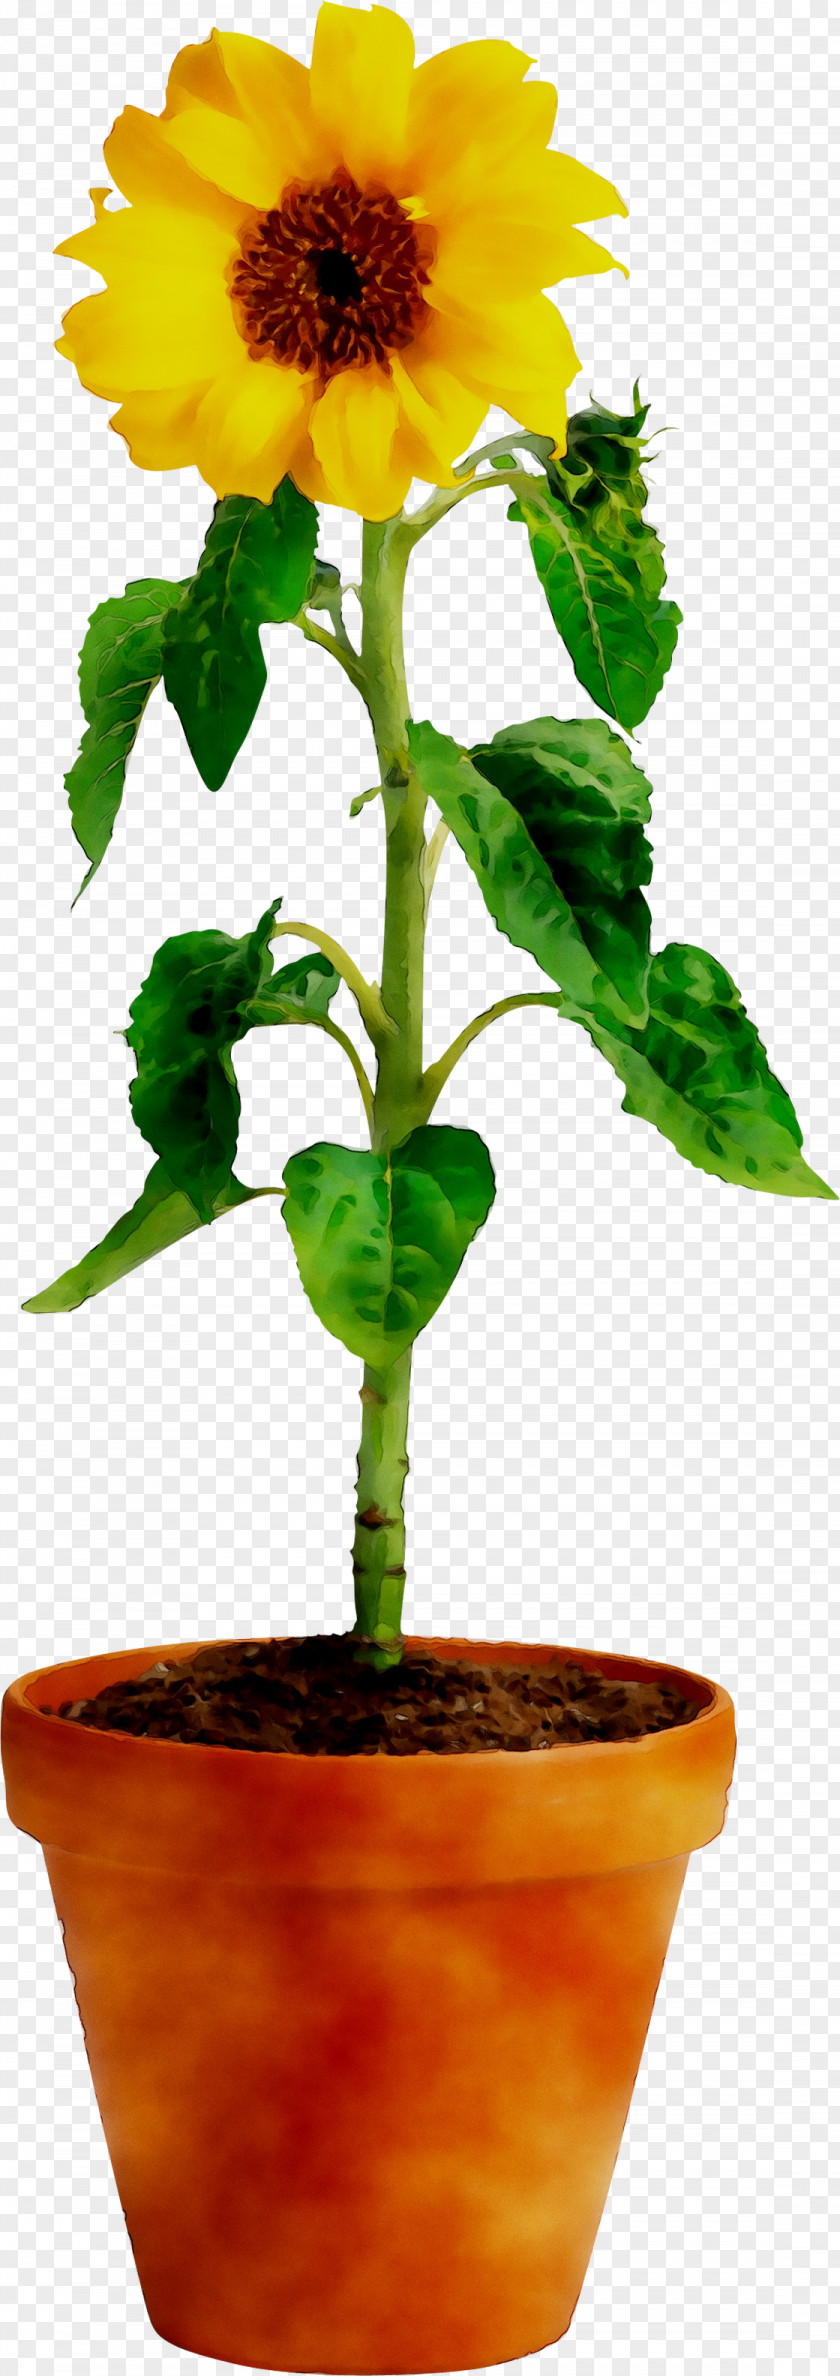 Common Sunflower Seed Plant Stem Plants PNG